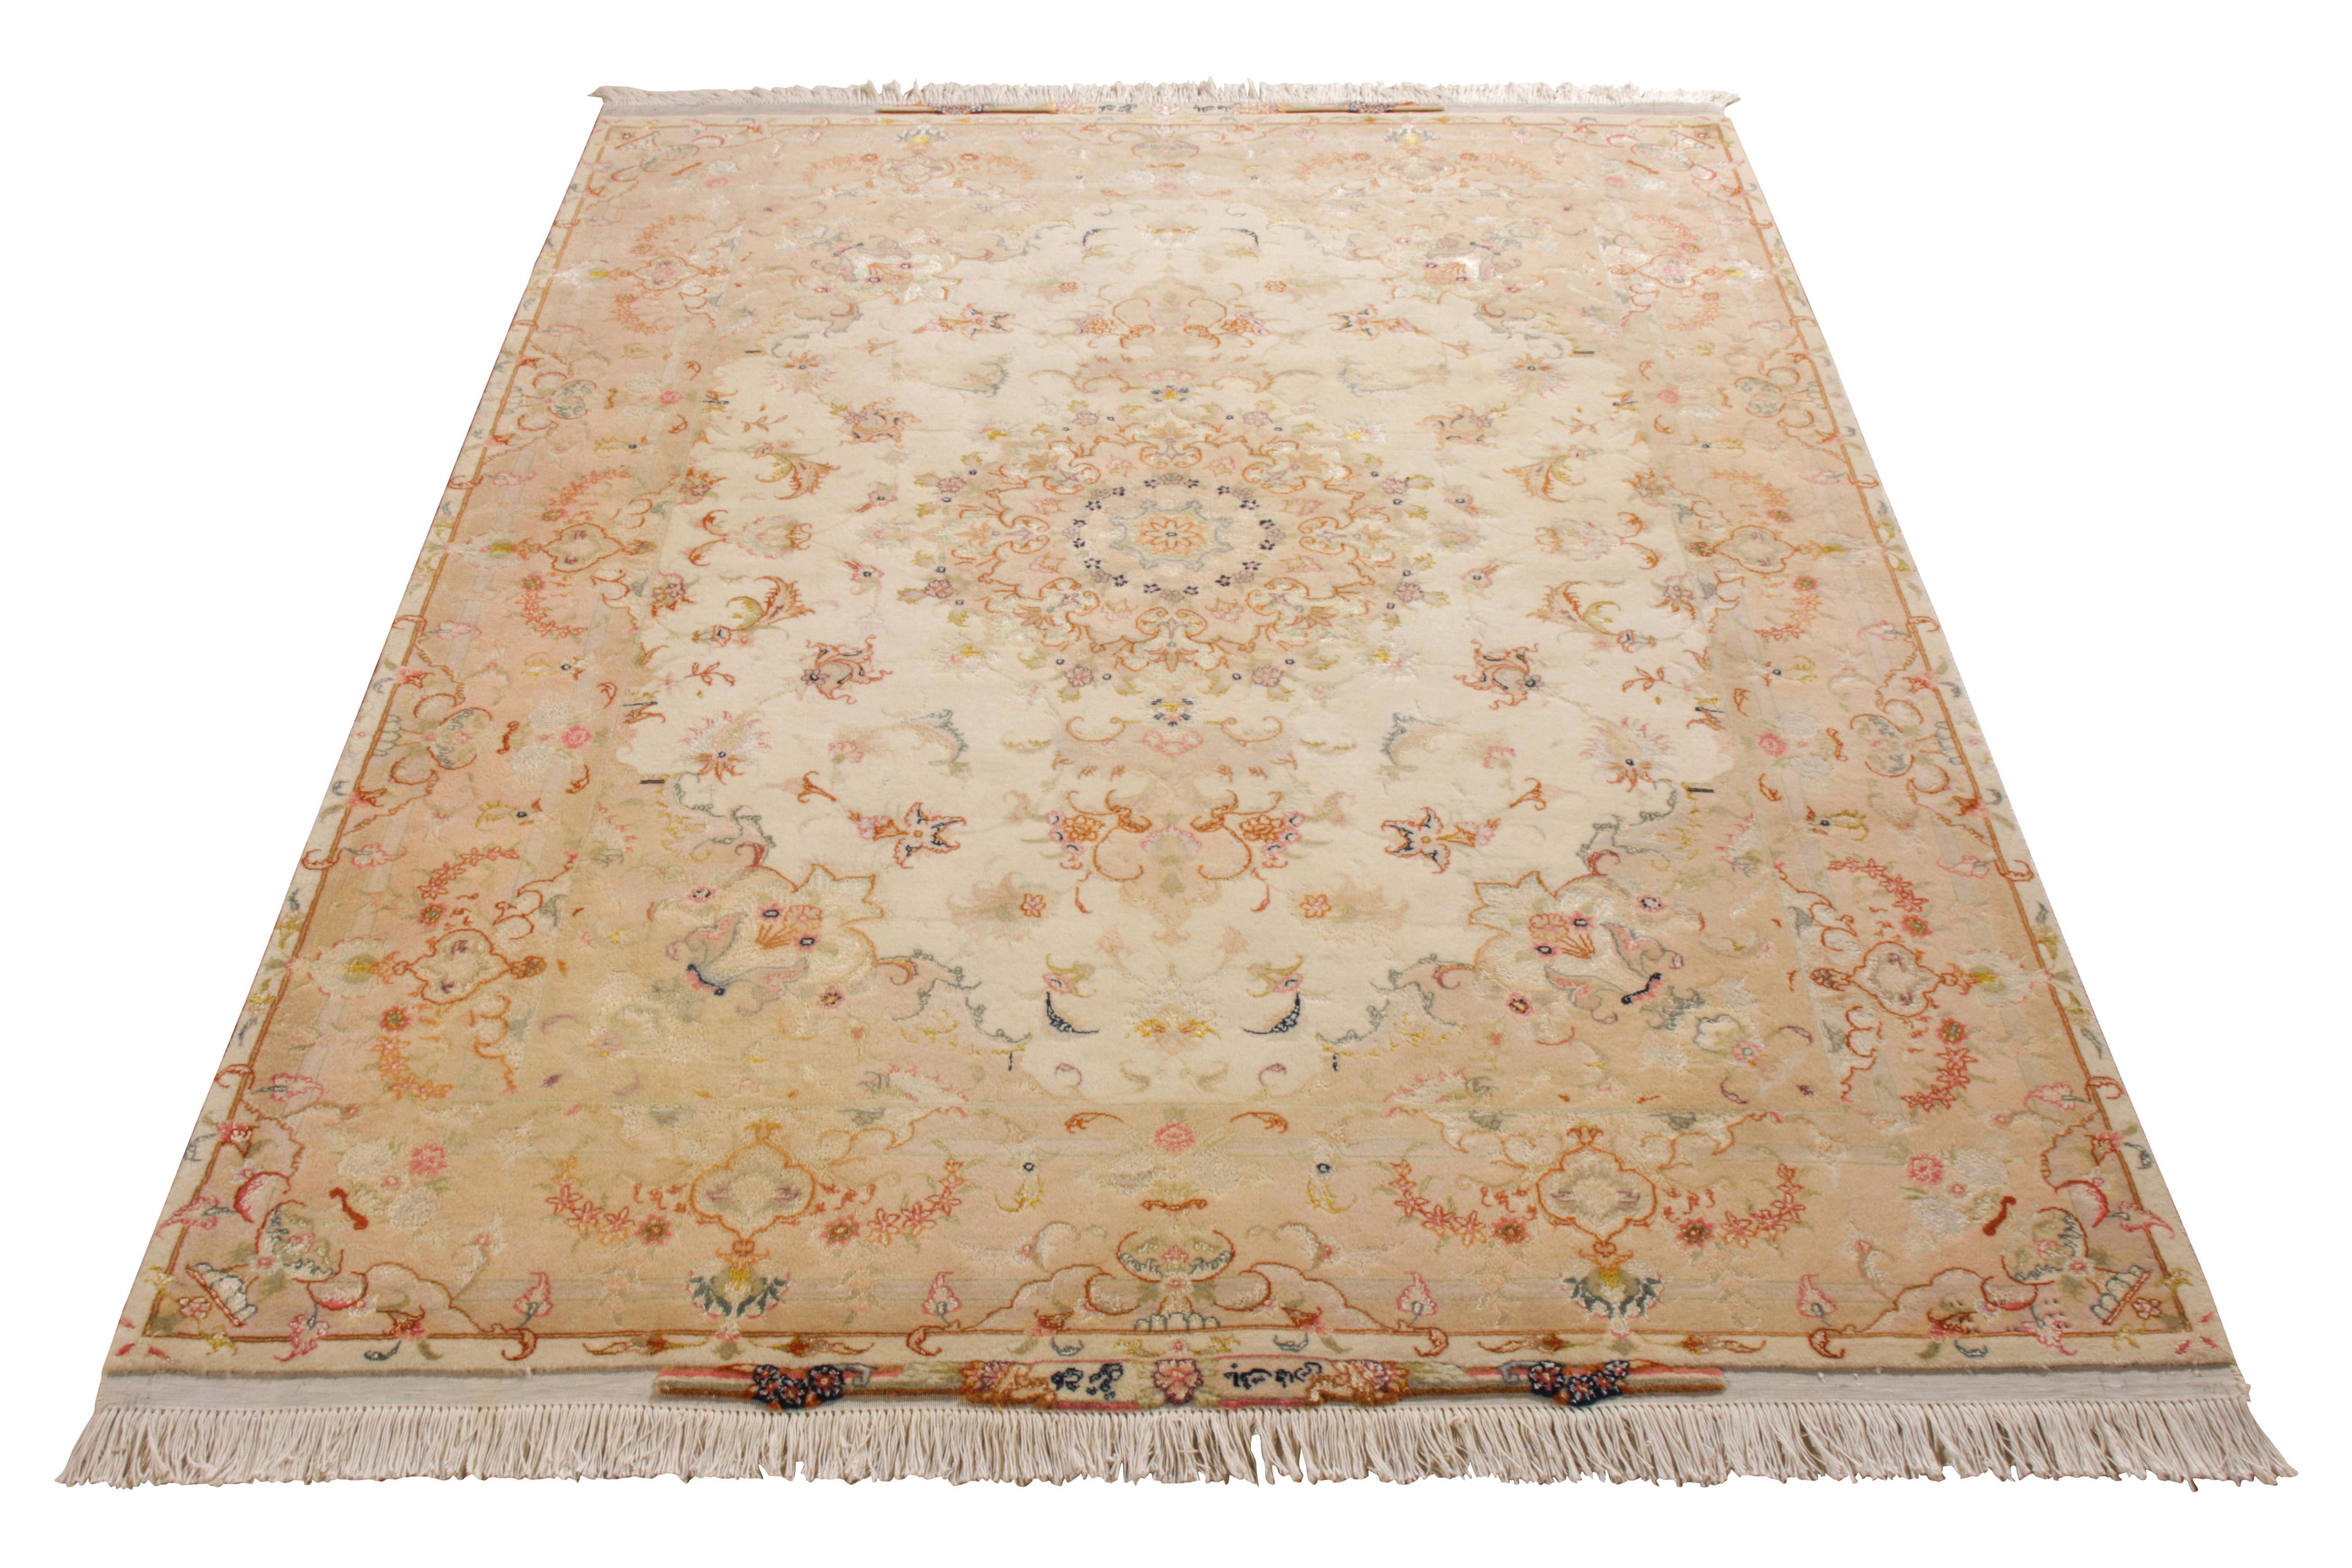 An exquisite 5 x 7 mid-century Persian rug making way to Rug & Kilim’s Antique & Vintage collection. The piece boasts an eye-catching medallion pattern that rests in a comforting Peach and White colourway that harbours an elegant personality. The